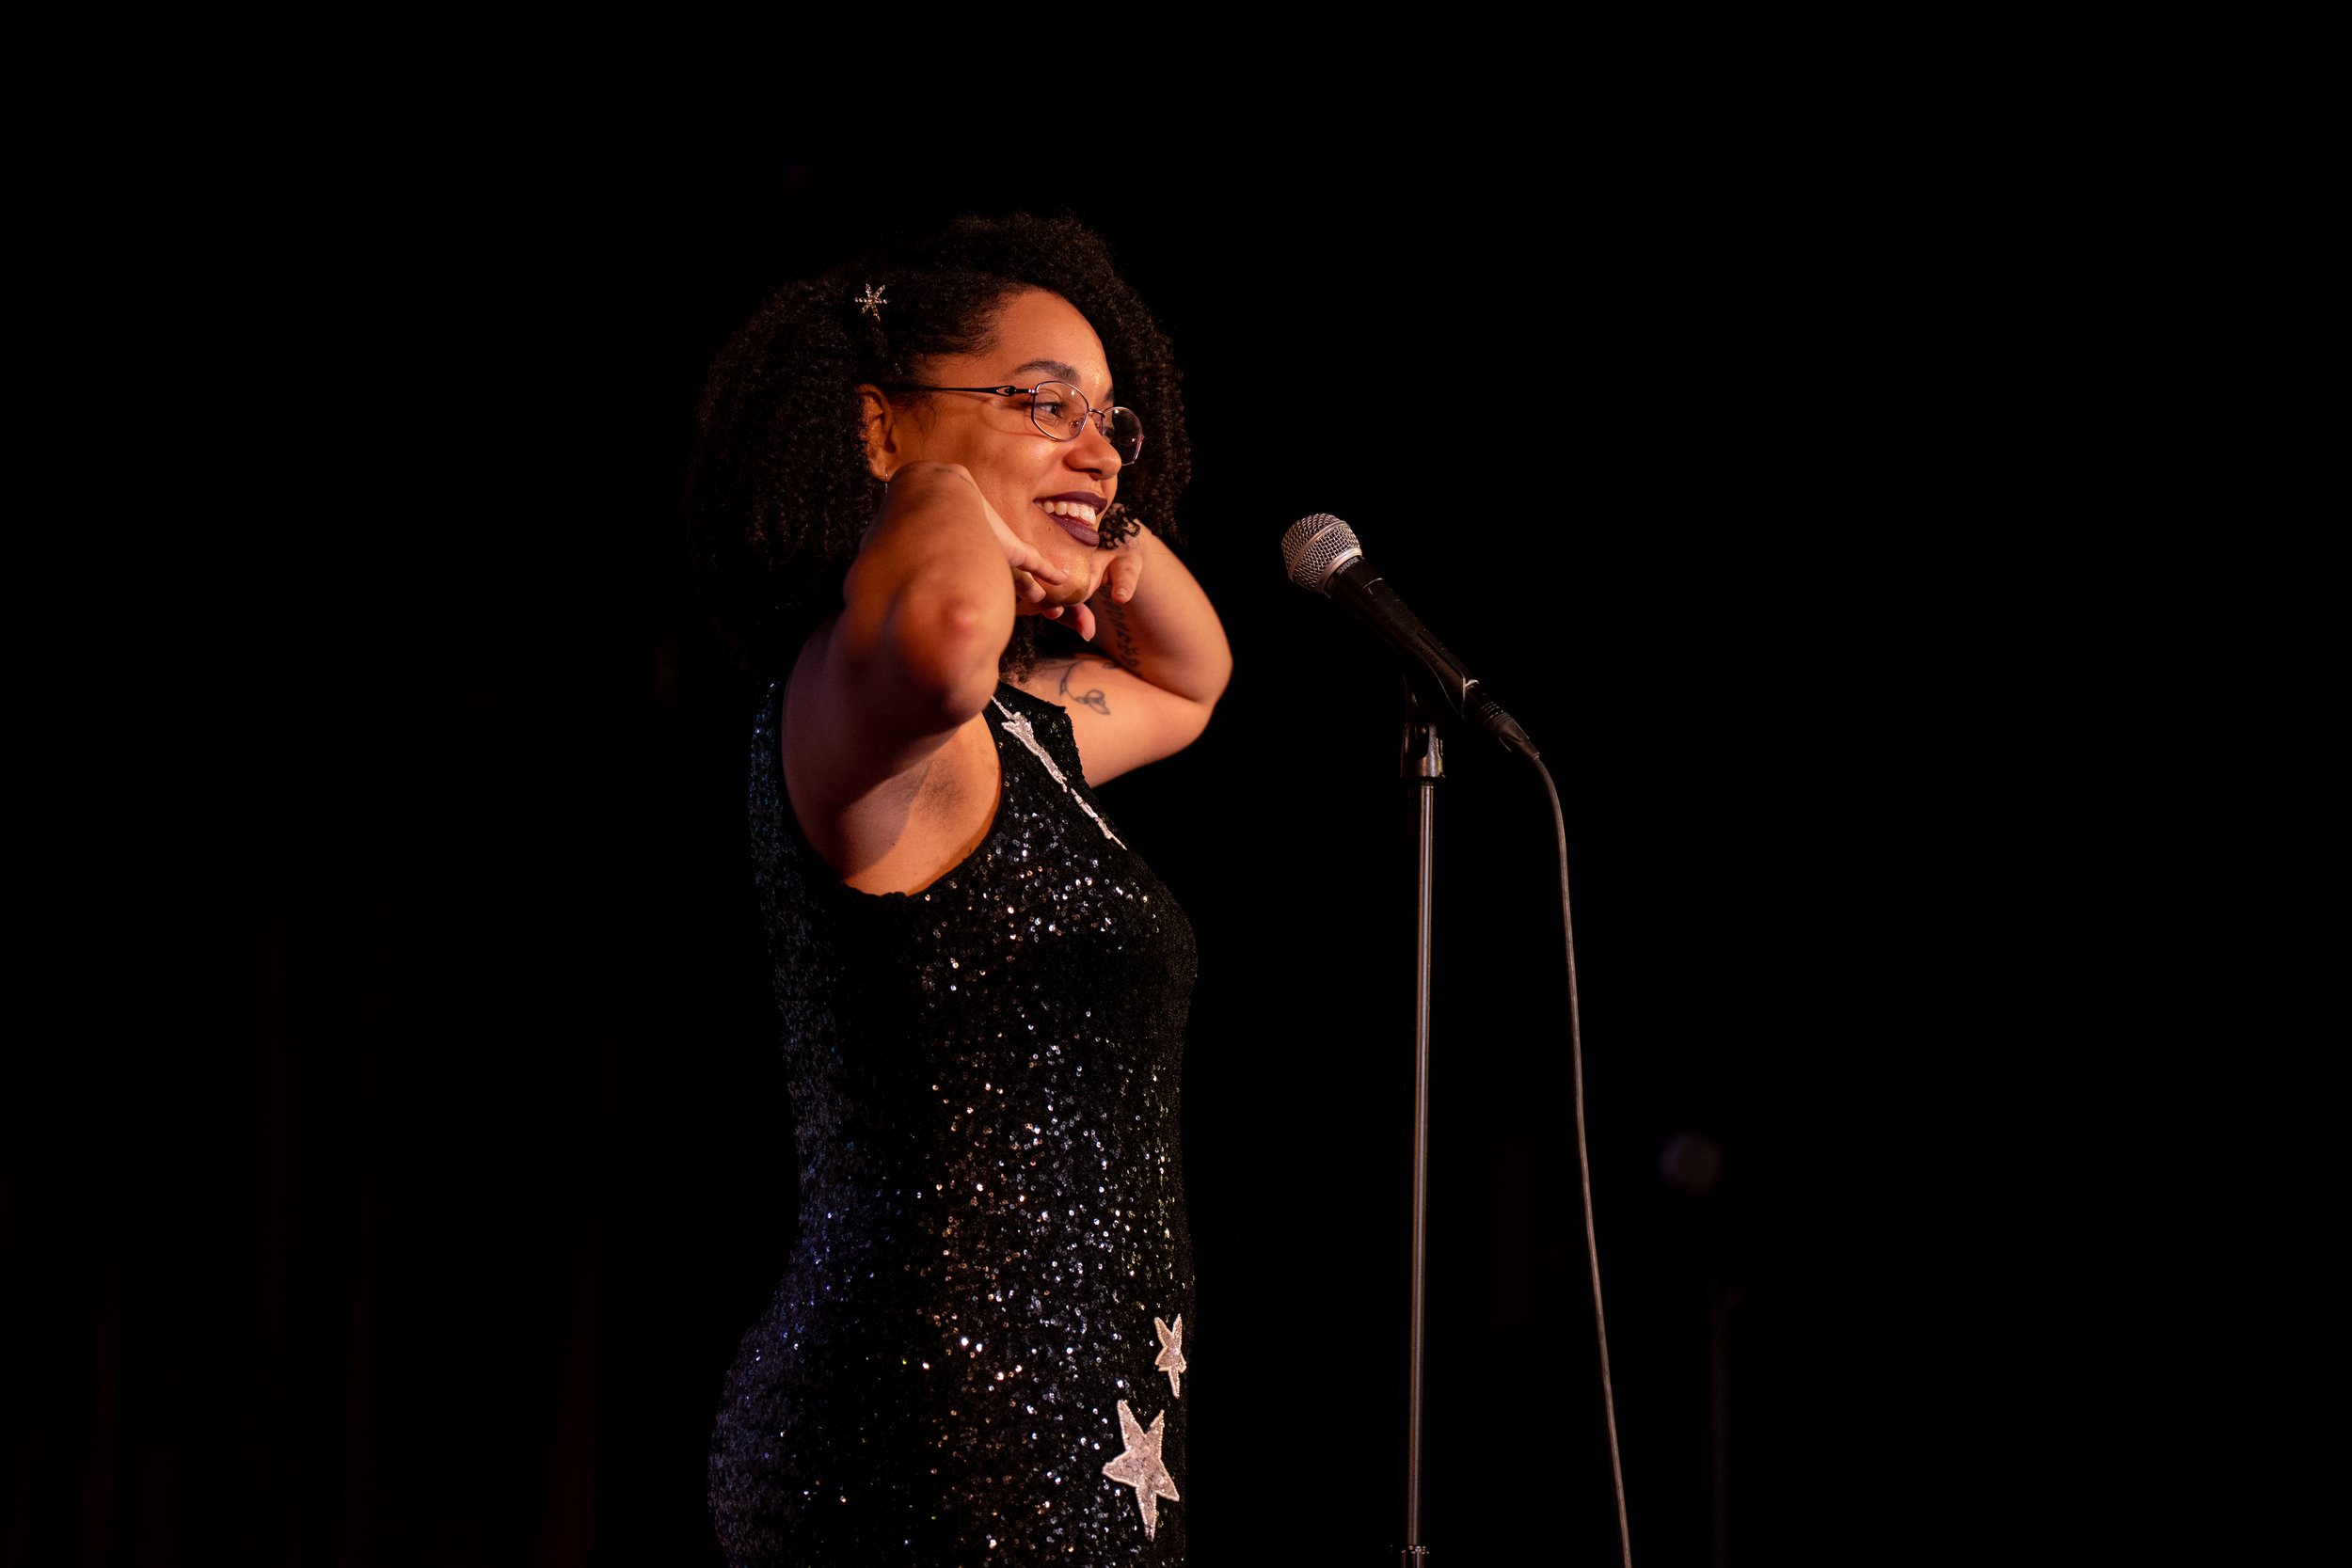  Astrophysicist, folklorist, and science communicator Dr. Moiya McTier shares her story on stage at The Bell House in Brooklyn, NY. 